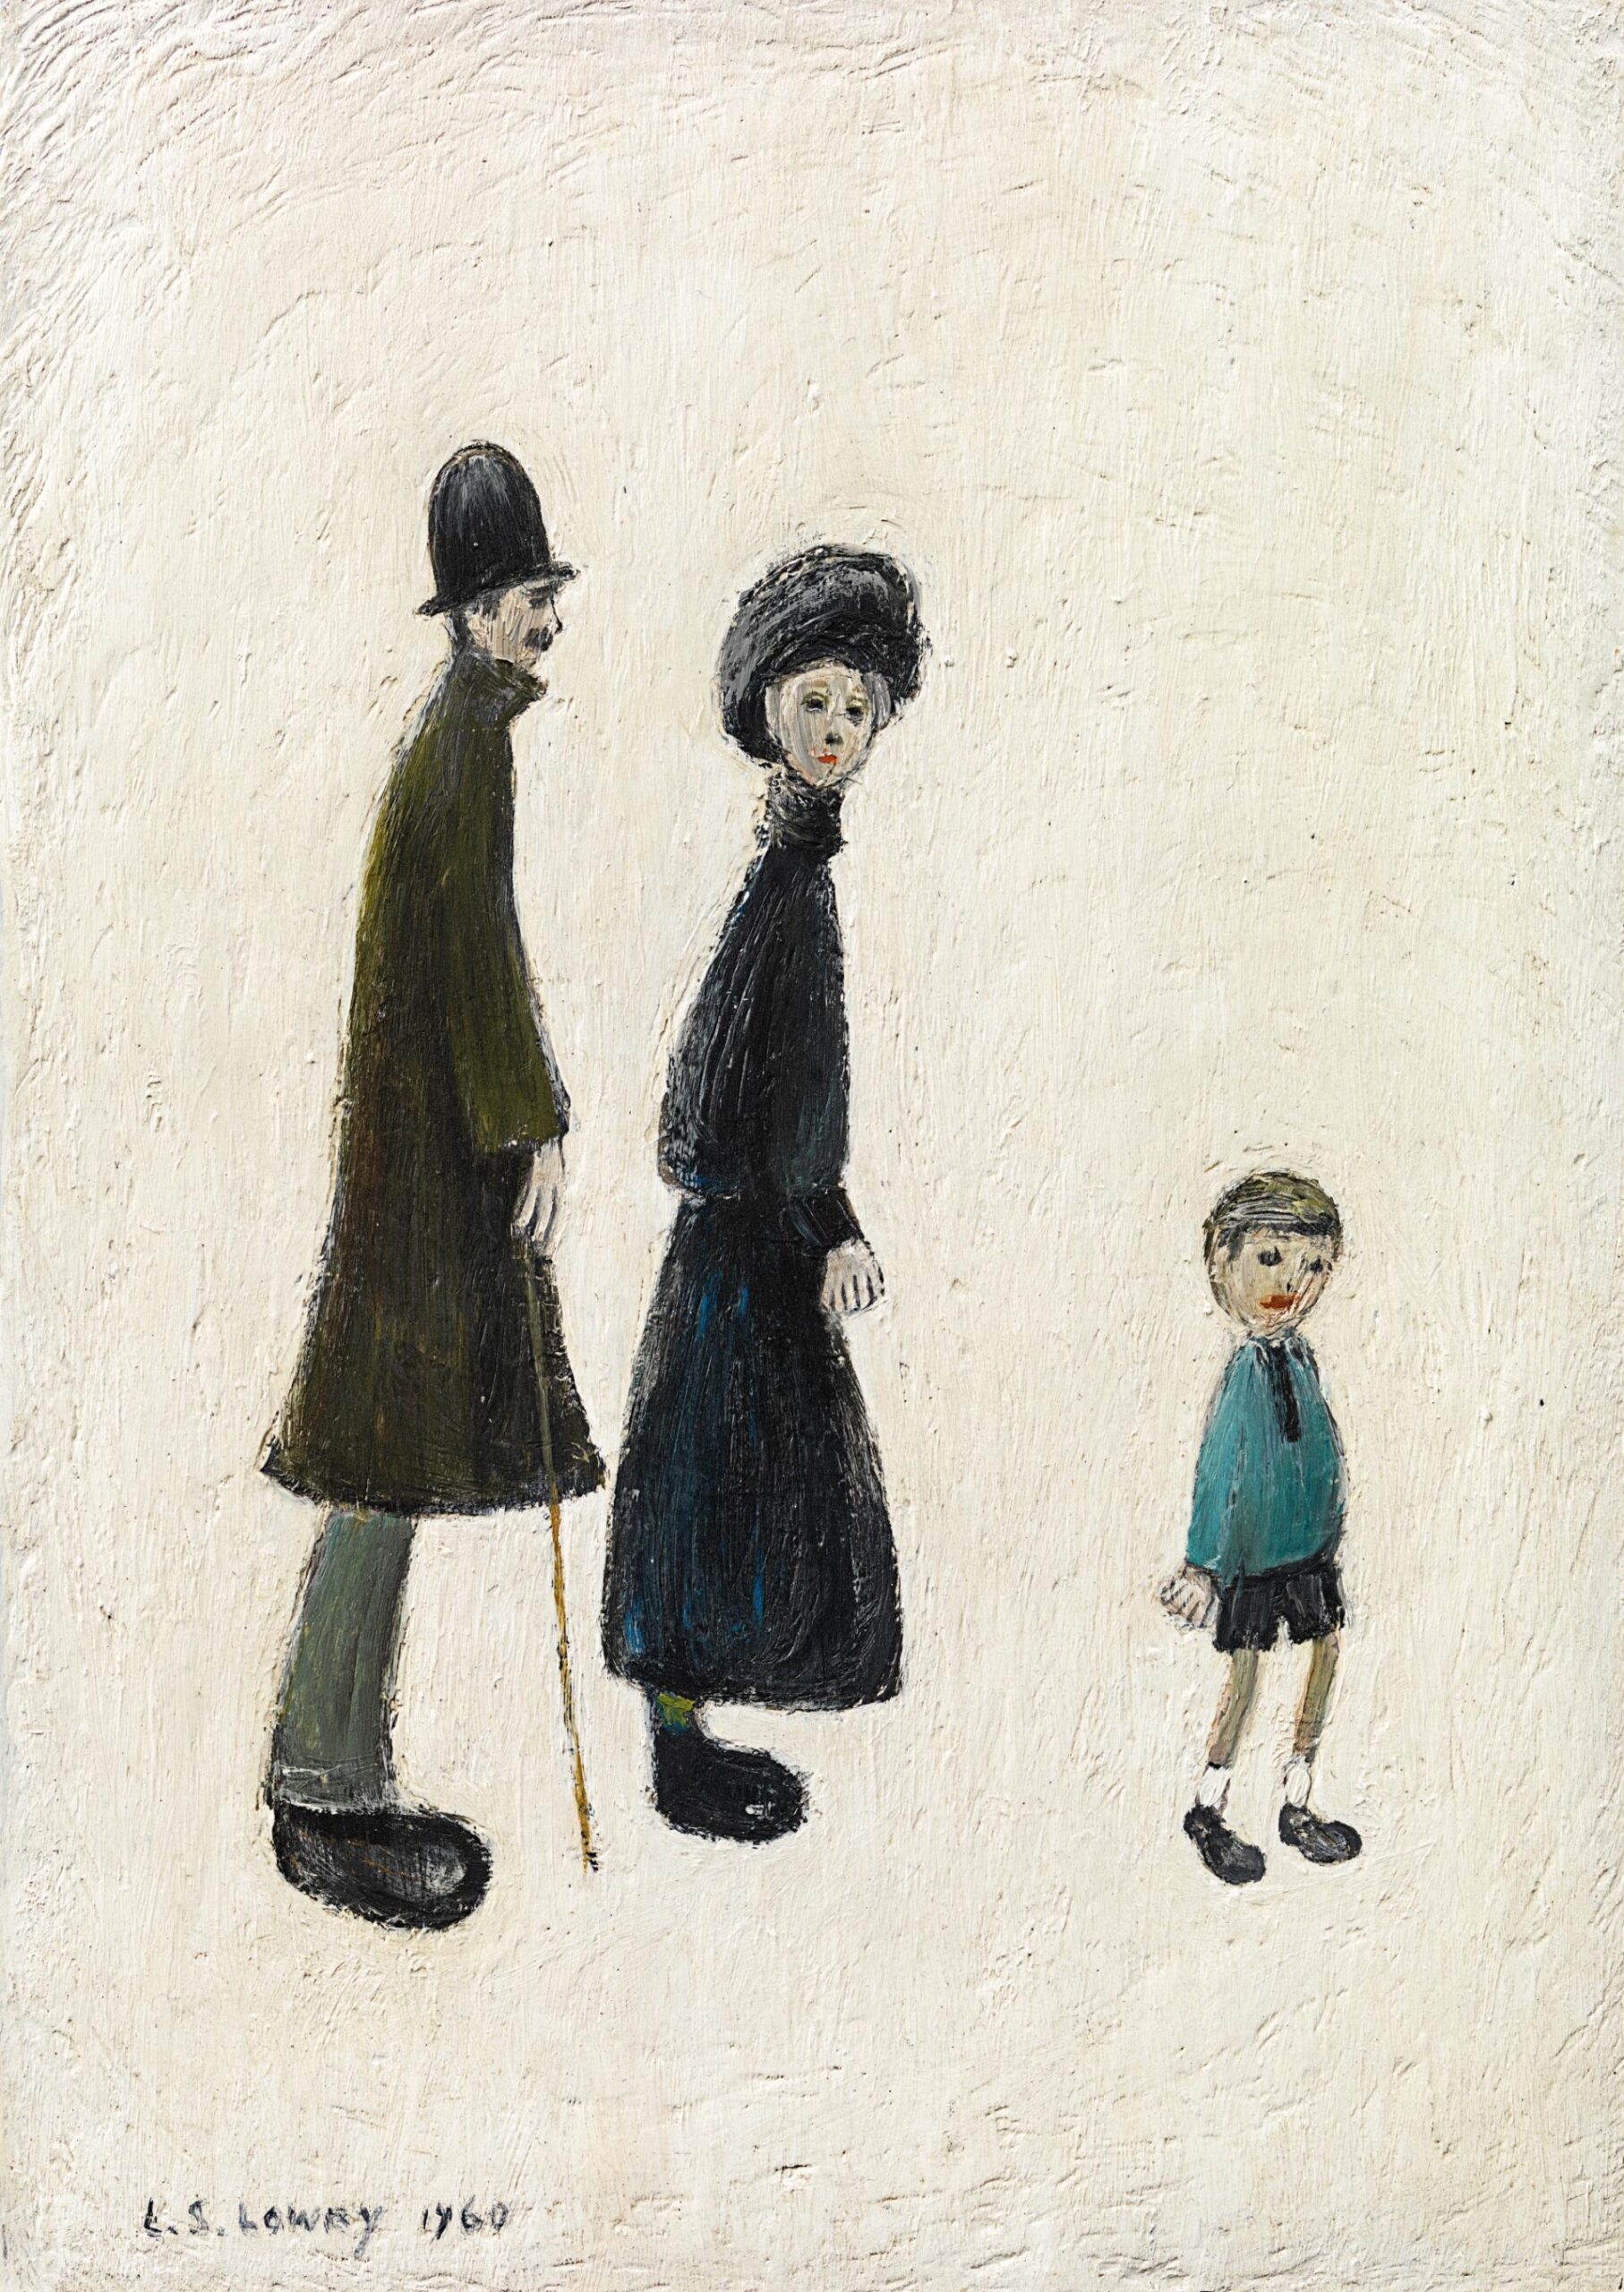 The Lady in Waiting: Lost LS Lowry Painting Found After Years